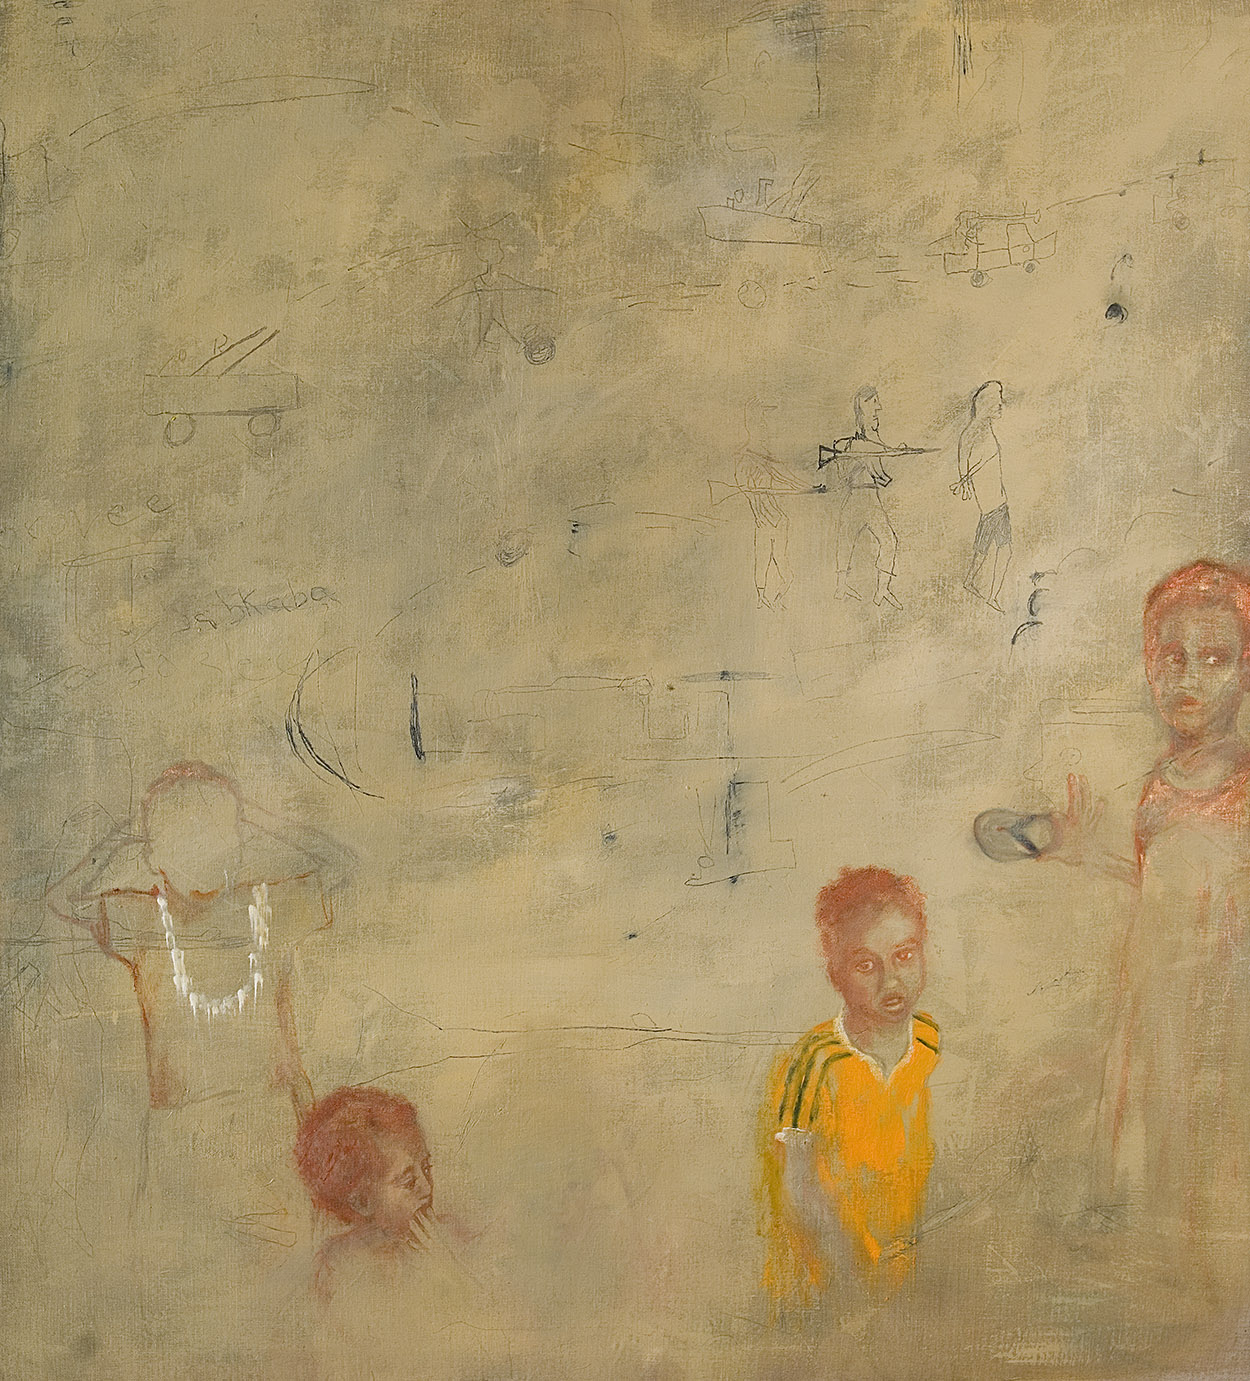    Somalia 2004     Oil paint and graphite on canvas. 138 x 125 cm. 